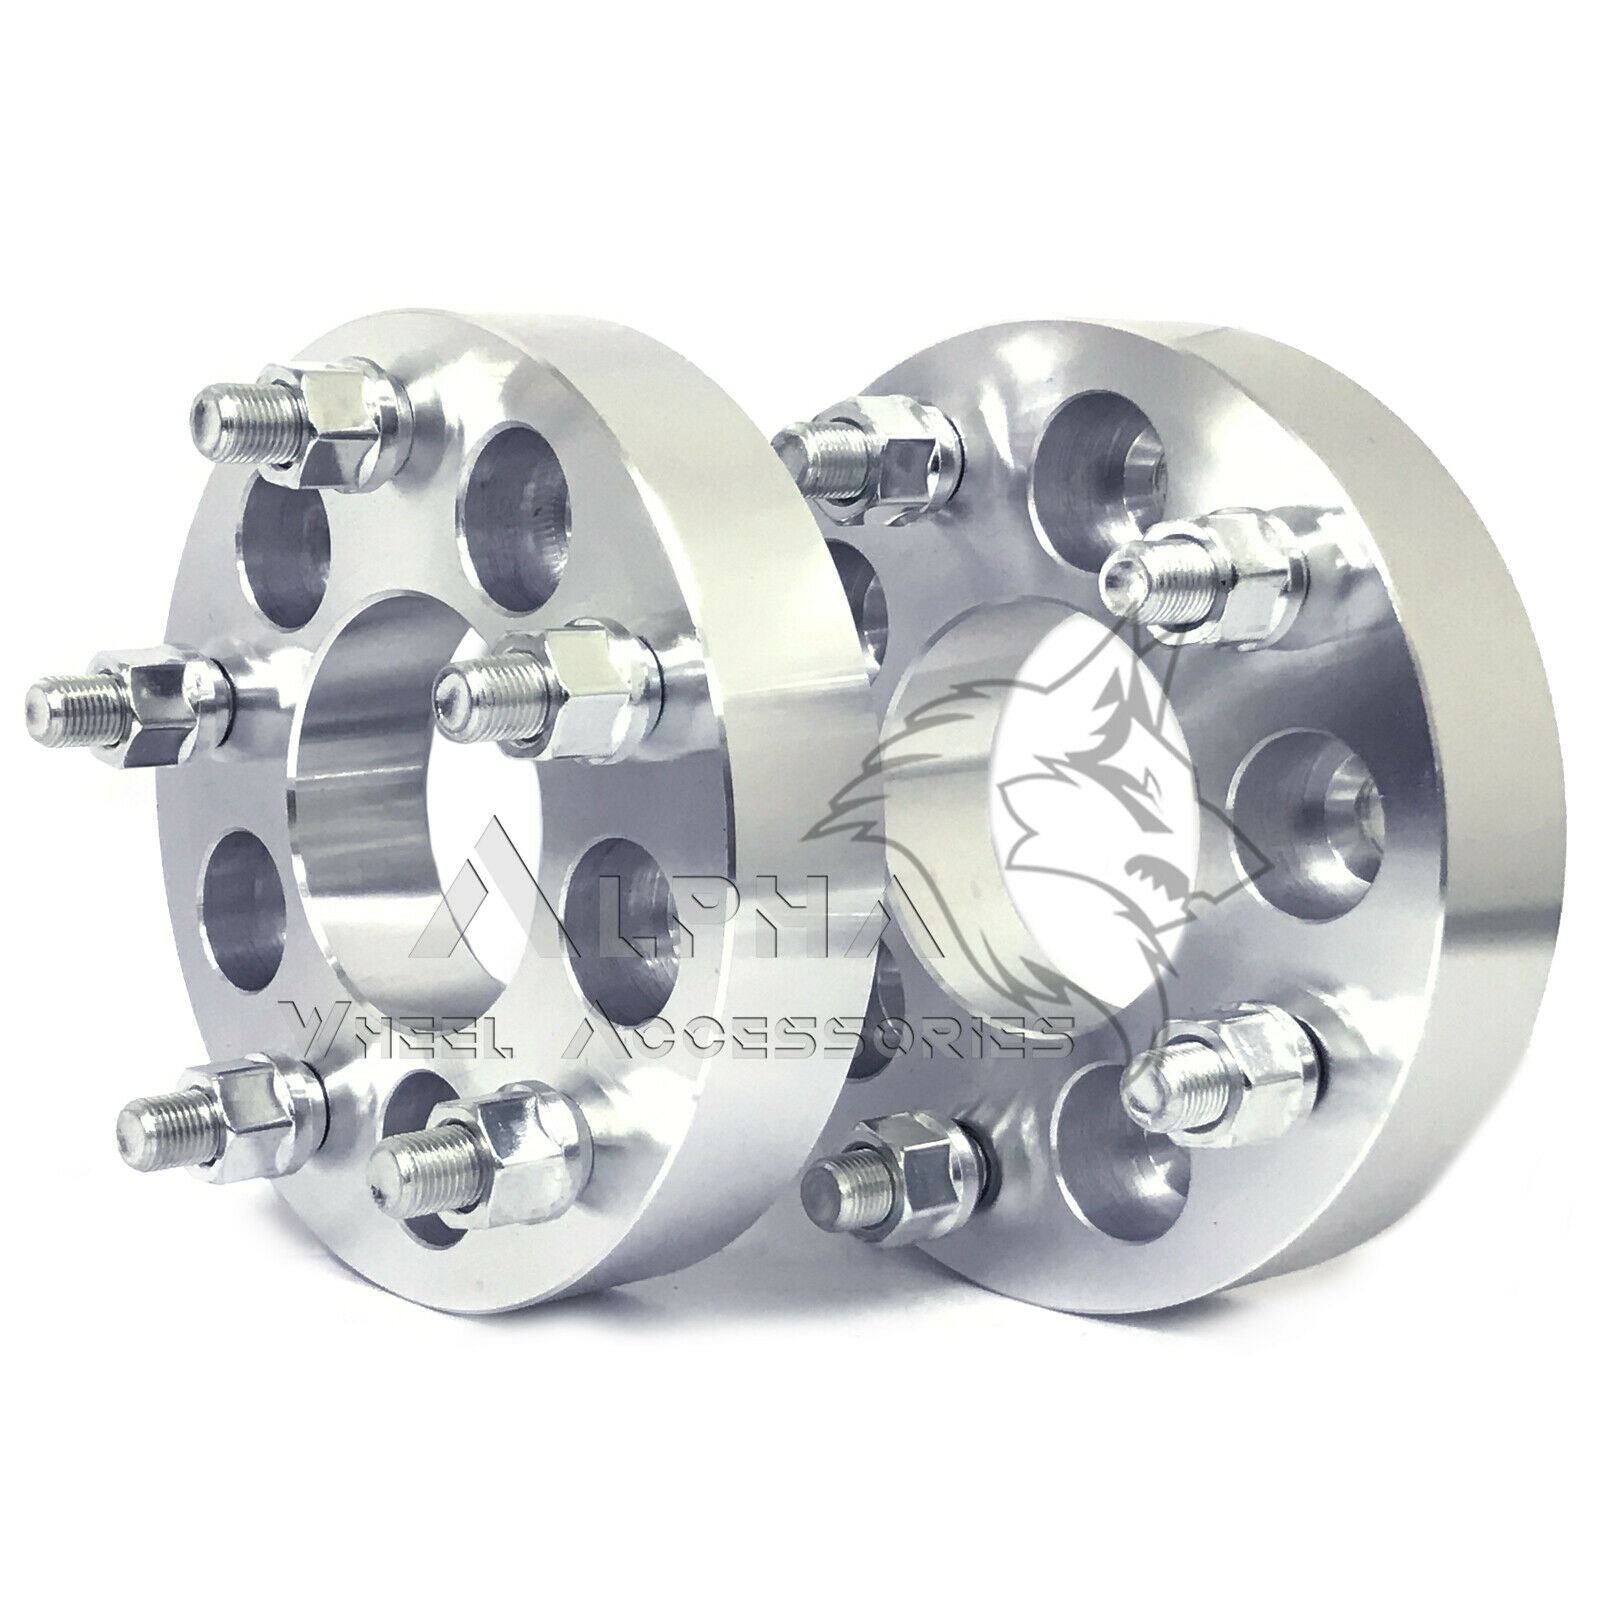 4 Wheel Spacers Adapters 5x5 To 5x4.5 1.5 - 5x127 To 5x114.3 - Jeep 1/2  Stud